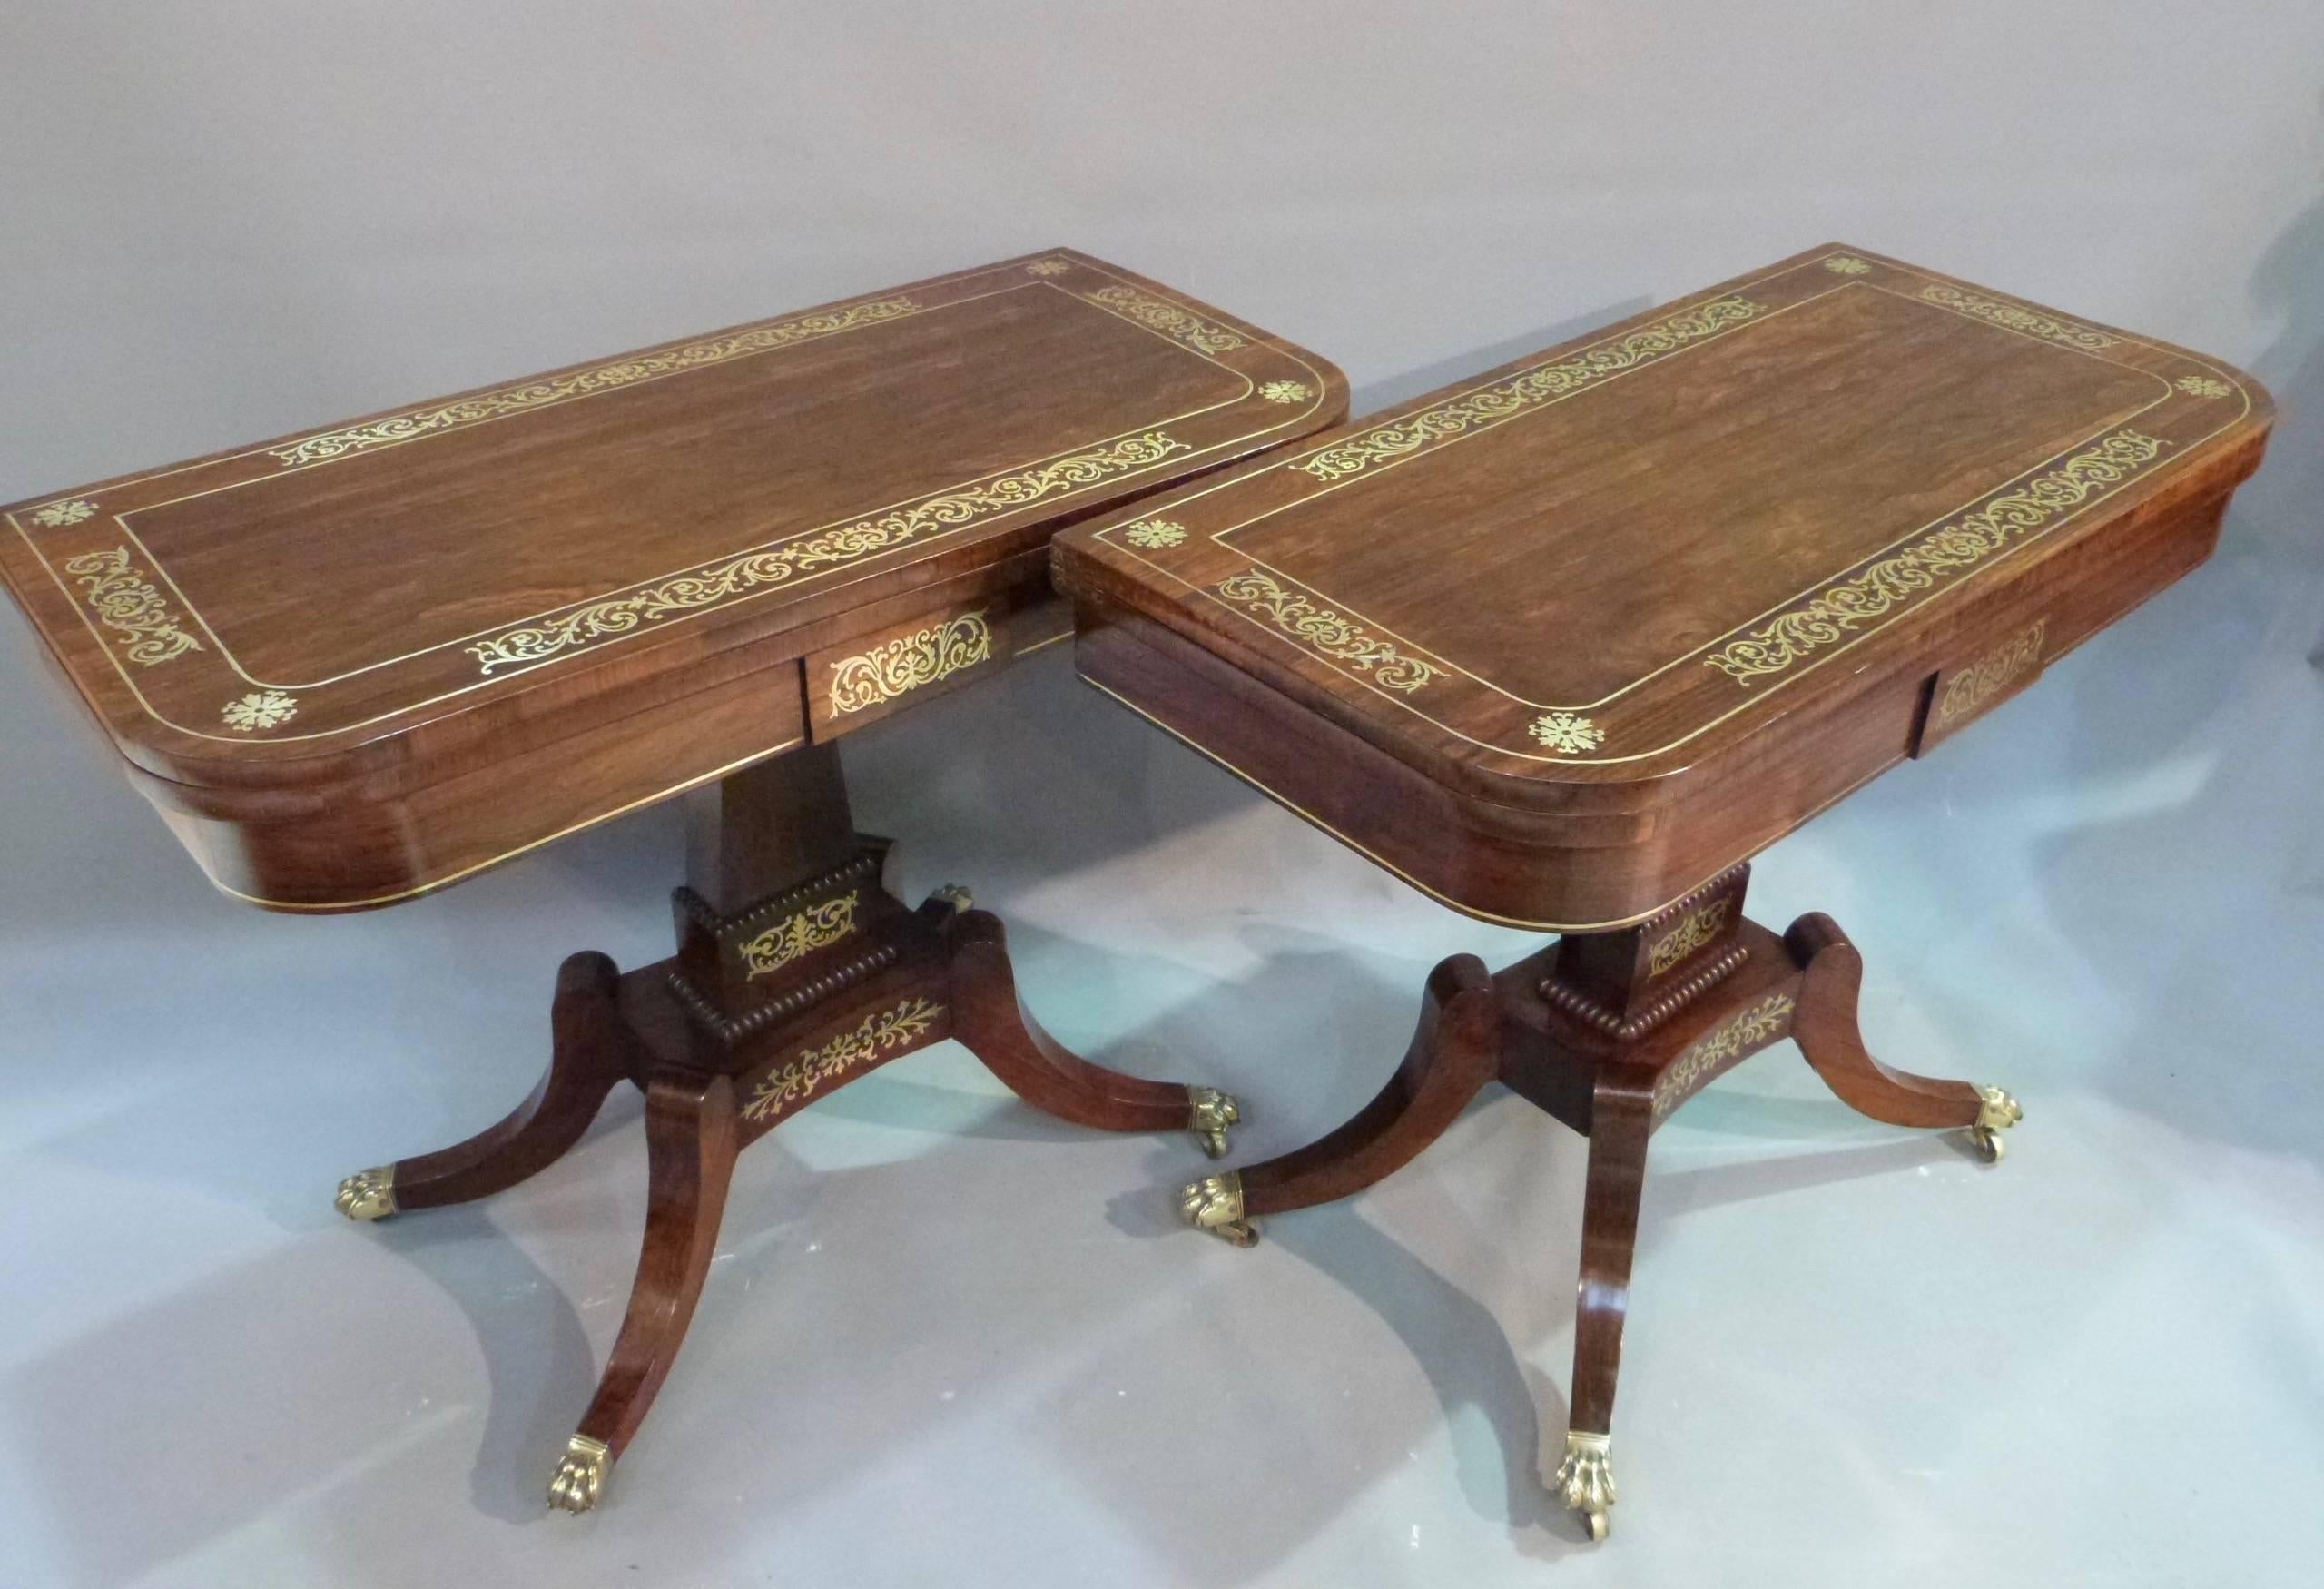 A pair of fine quality Regency rosewood and brass inlaid fold over card tables.